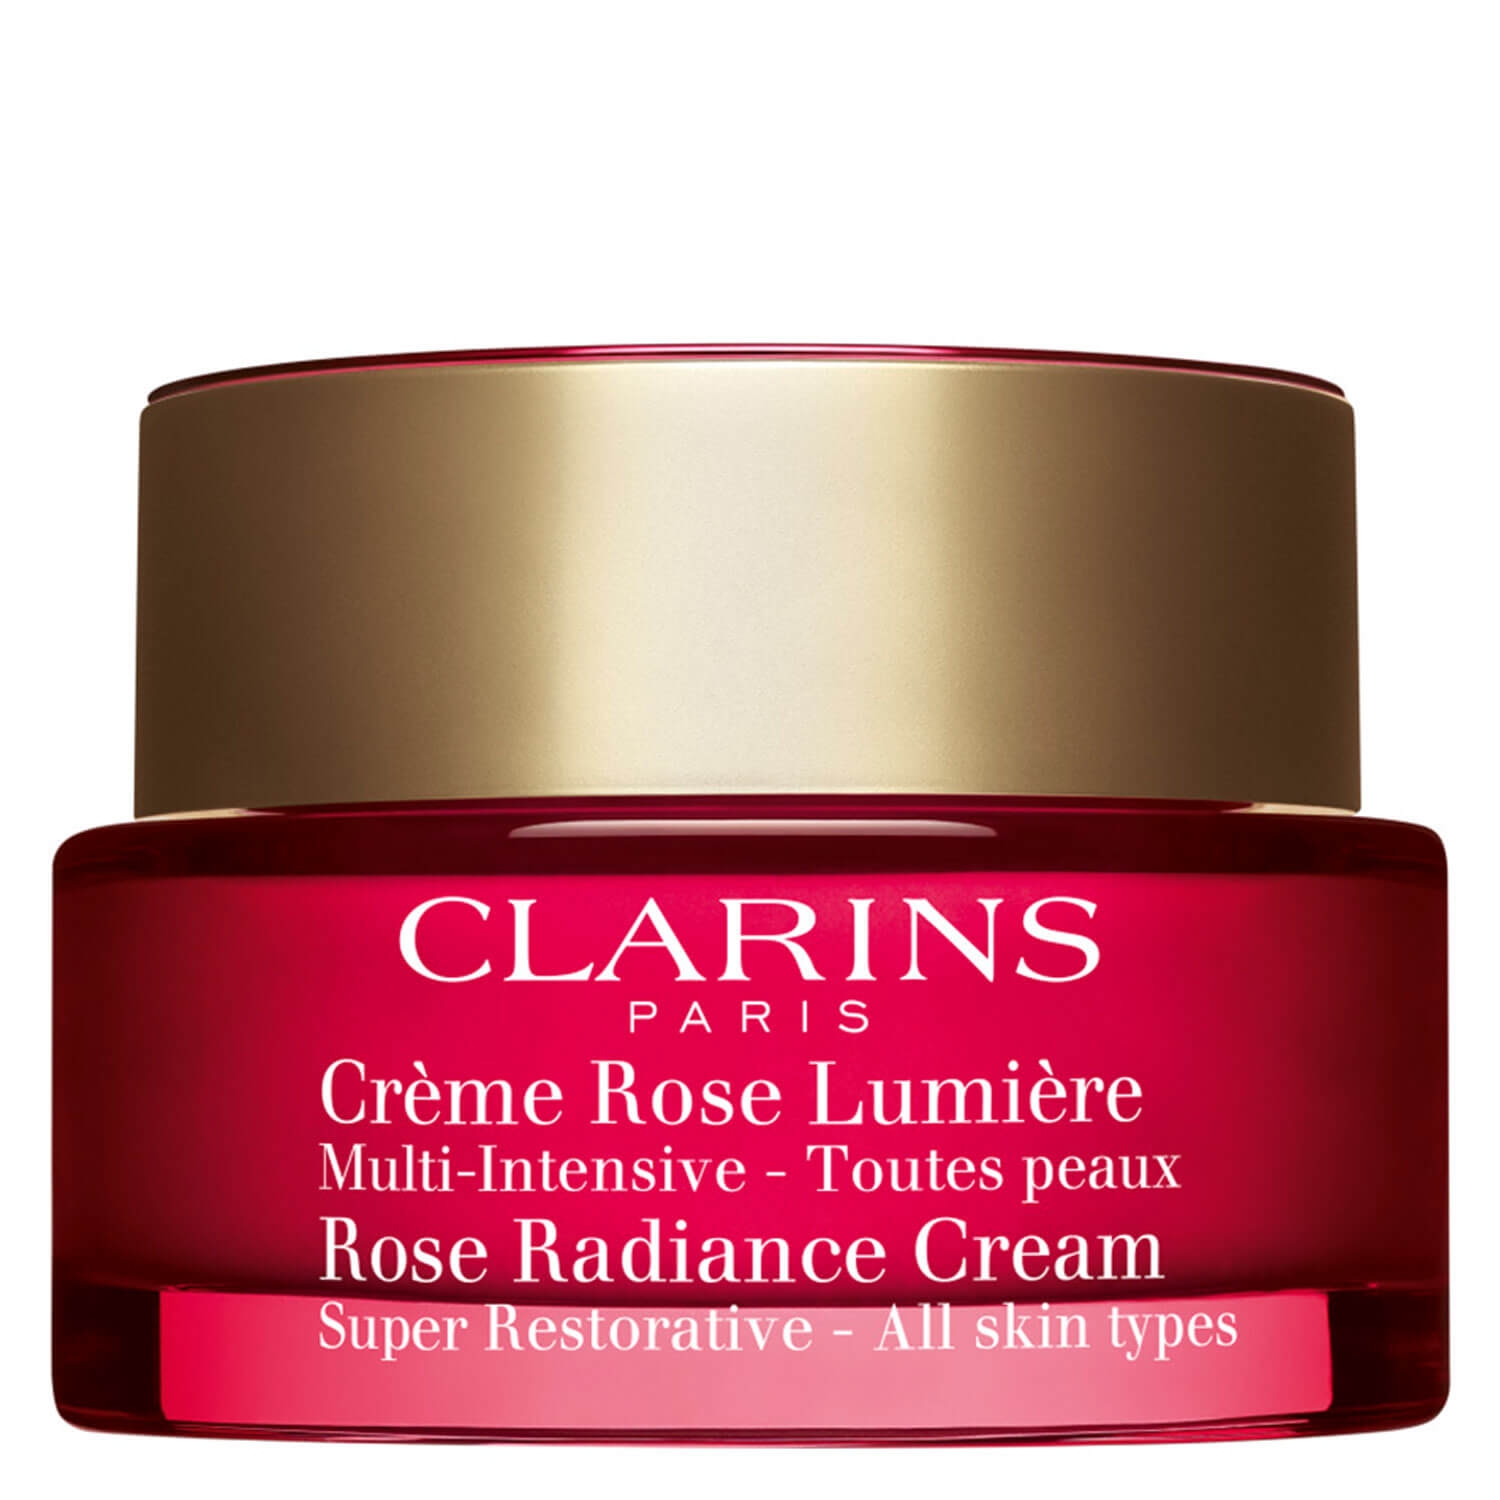 Product image from Clarins Skin - Crème Rose Lumière Multi-Intensive